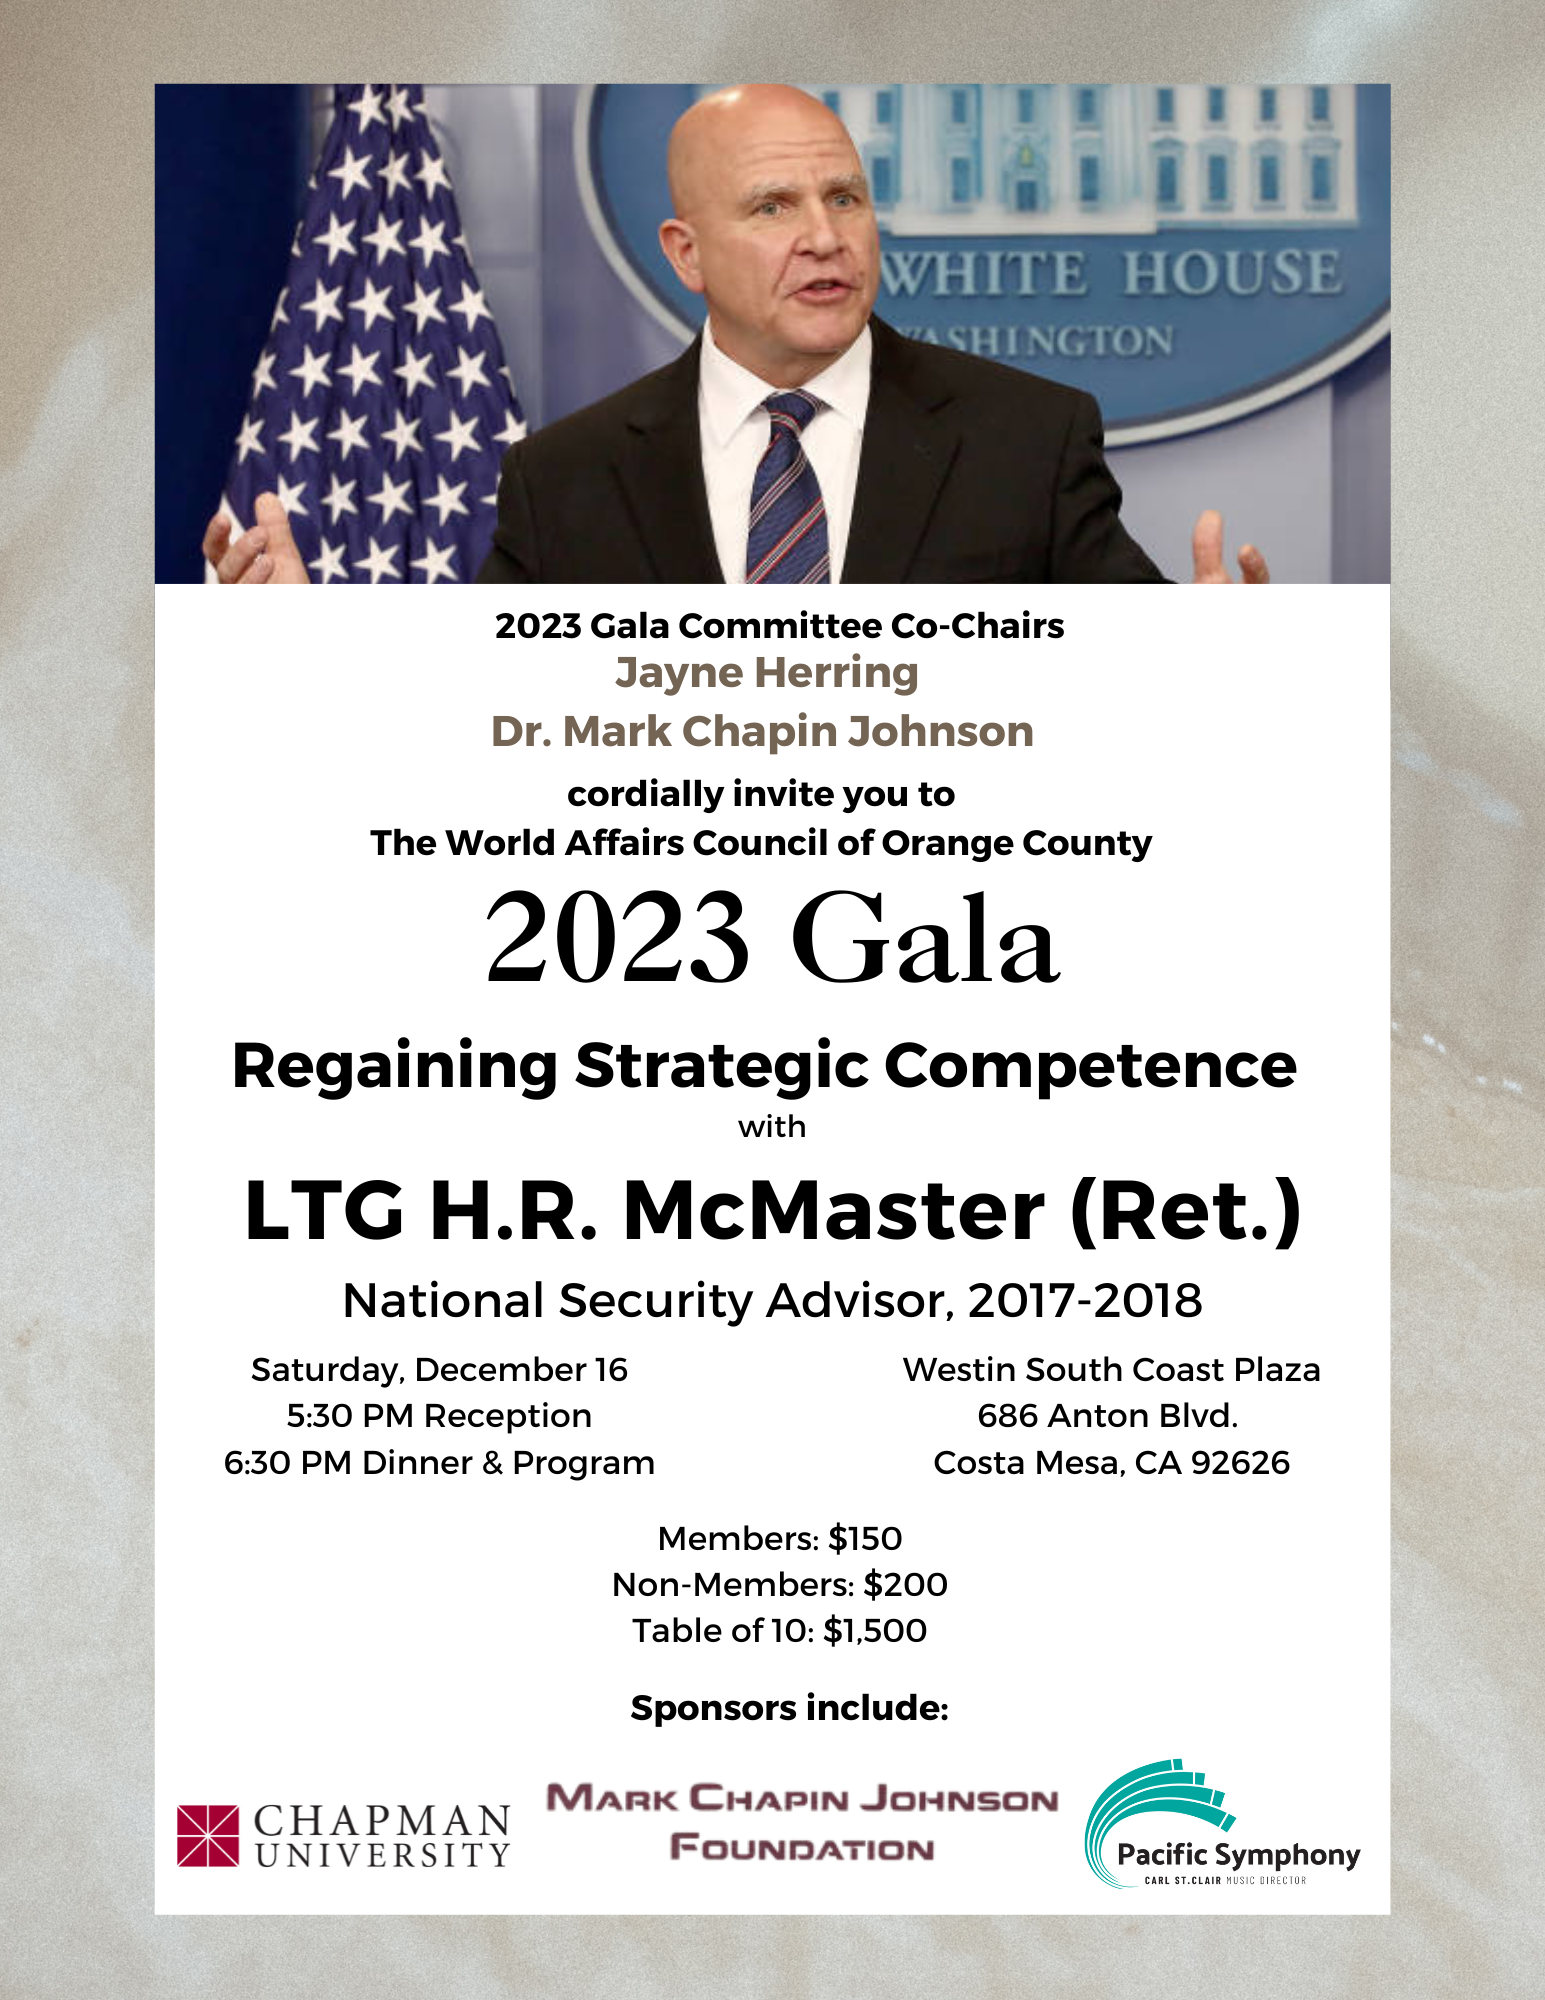 Annual Gala with LTG H.R. McMaster (Ret.)